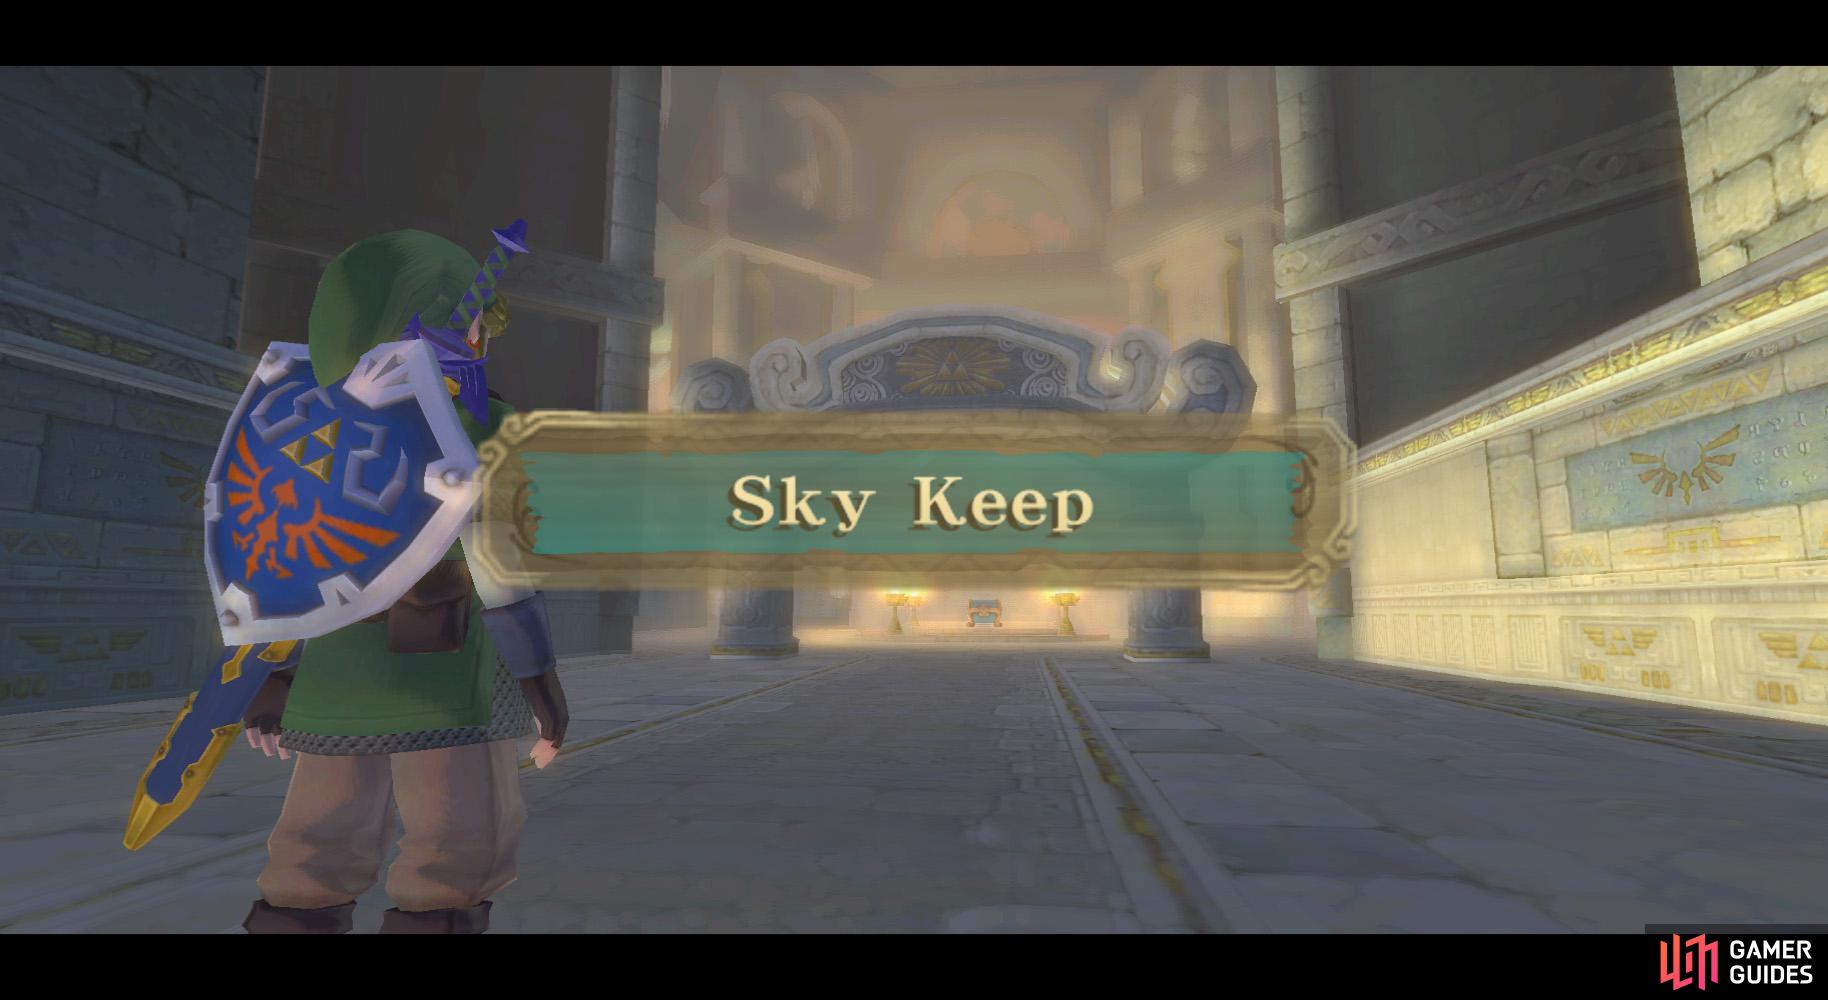 Sky Keep is the final dungeon in the game.